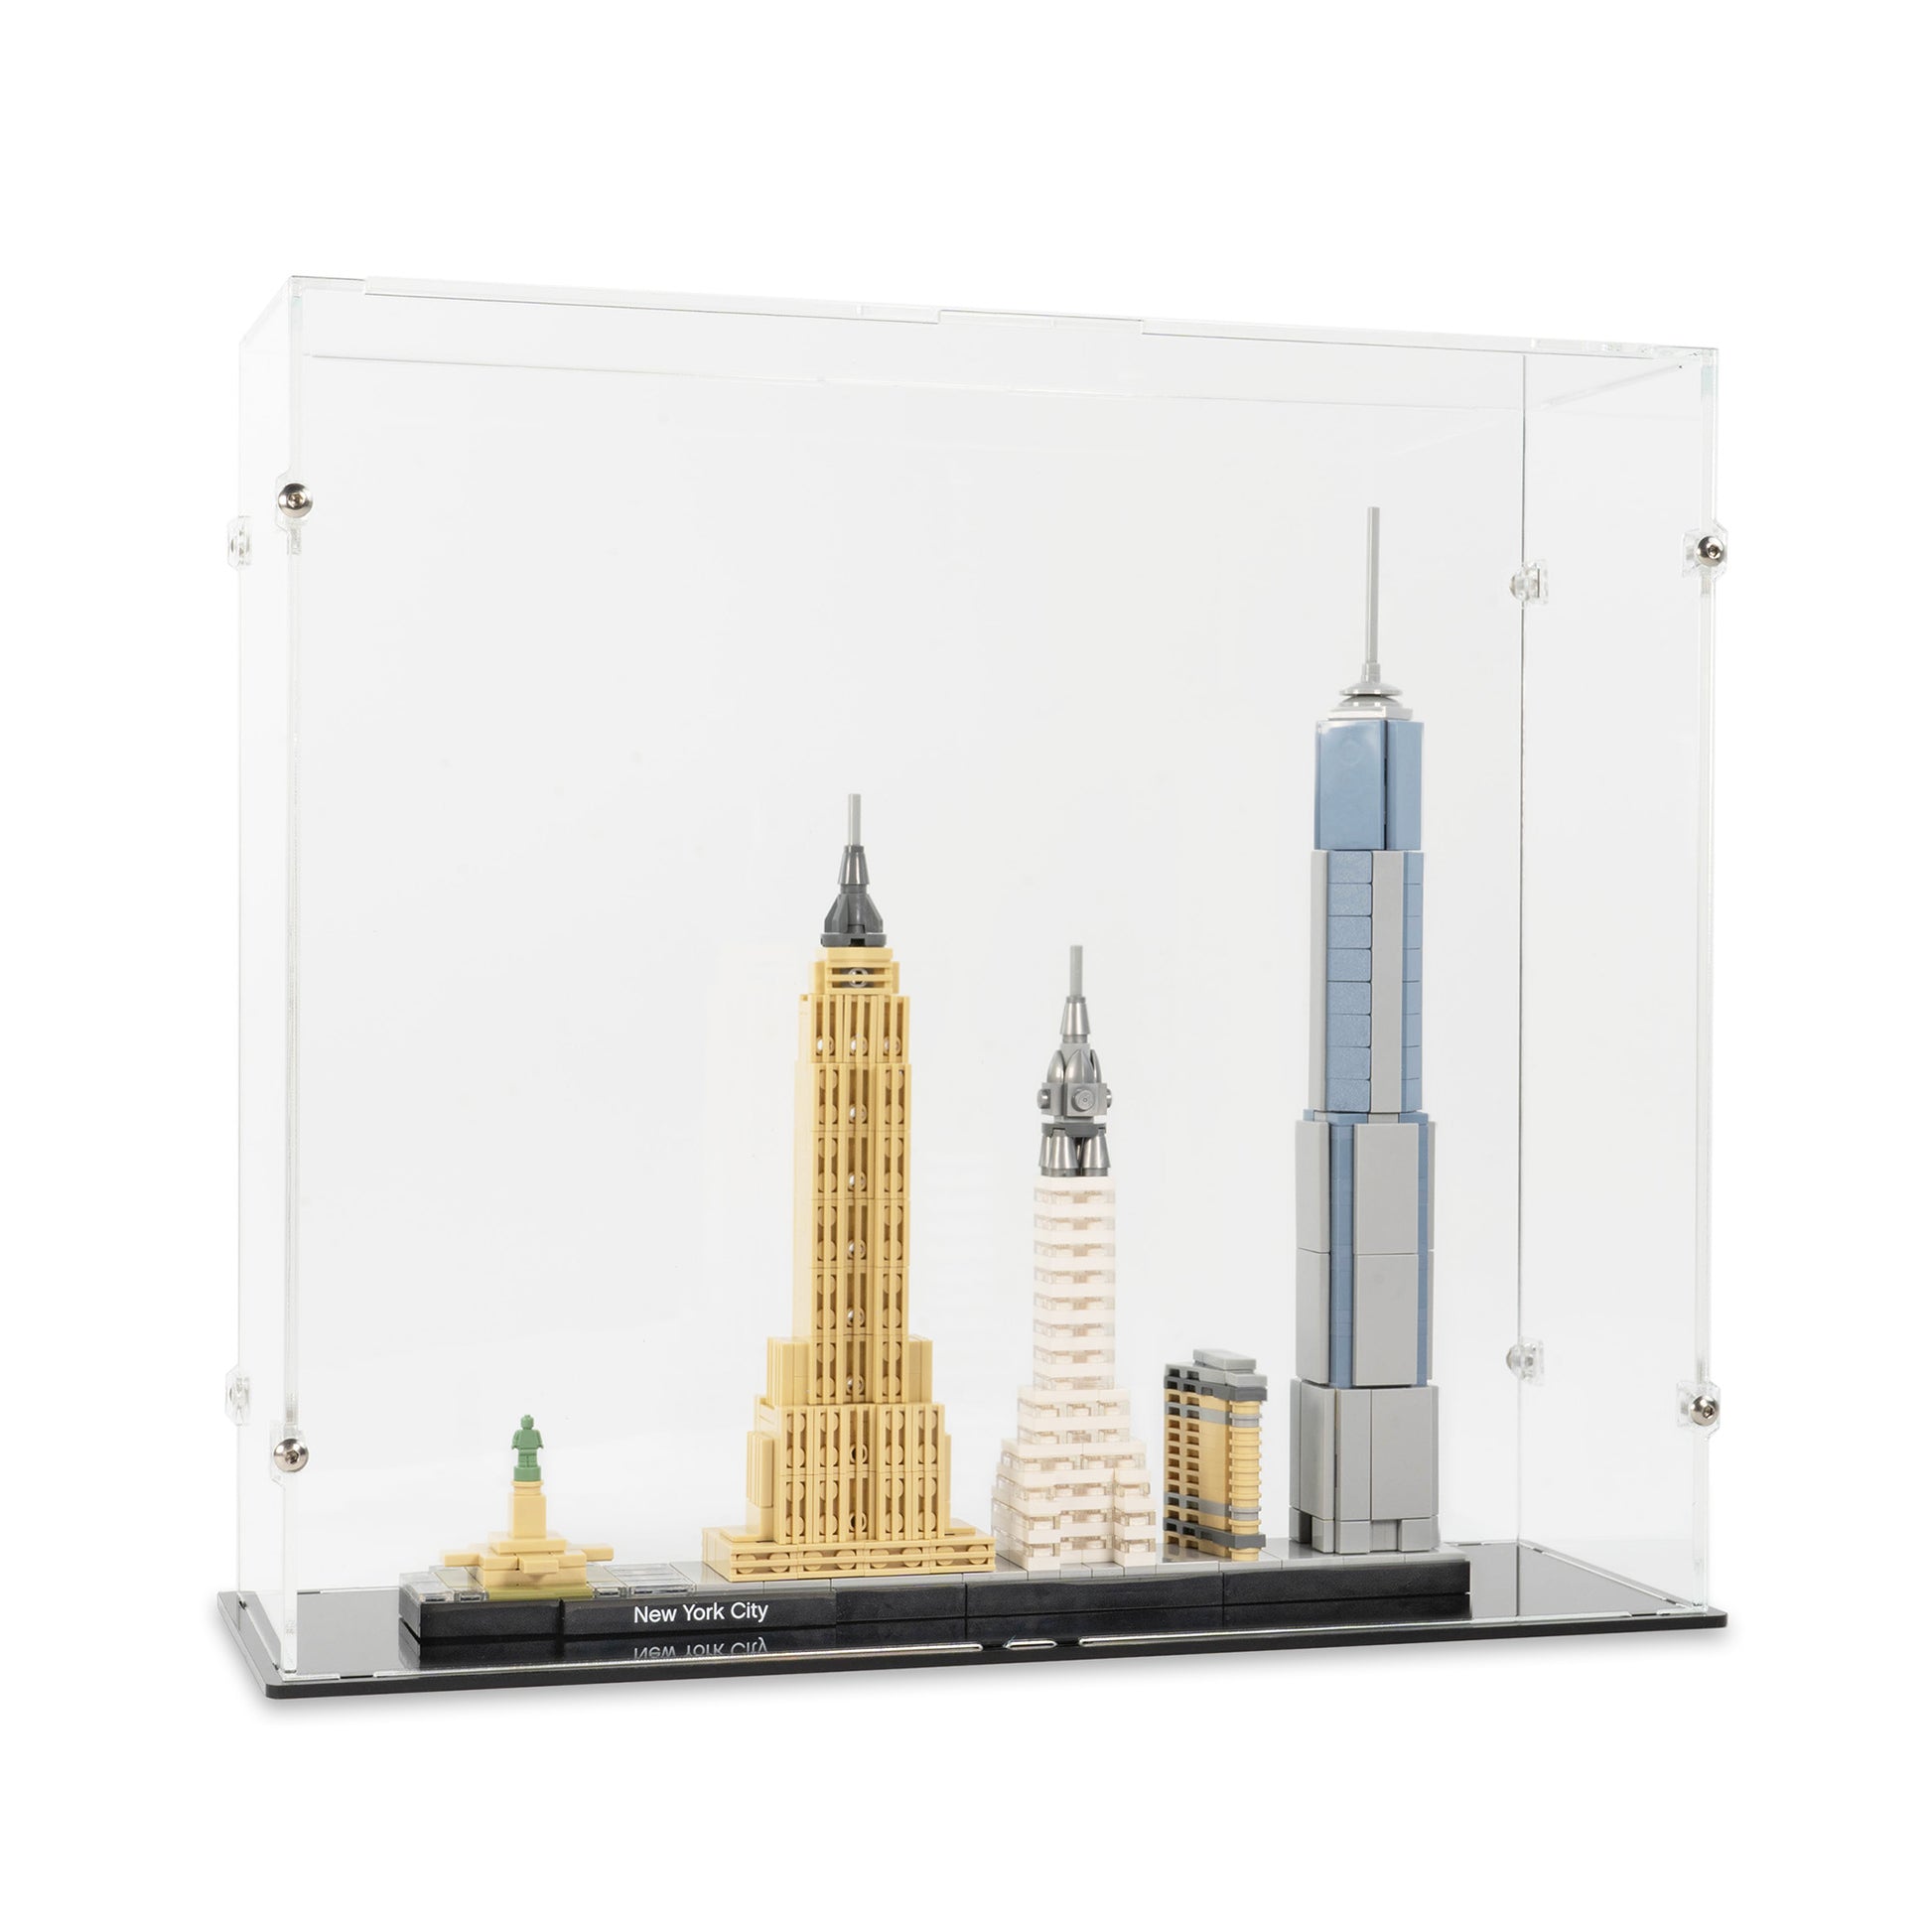 Angled view of LEGO 21028 New York City Display Case.